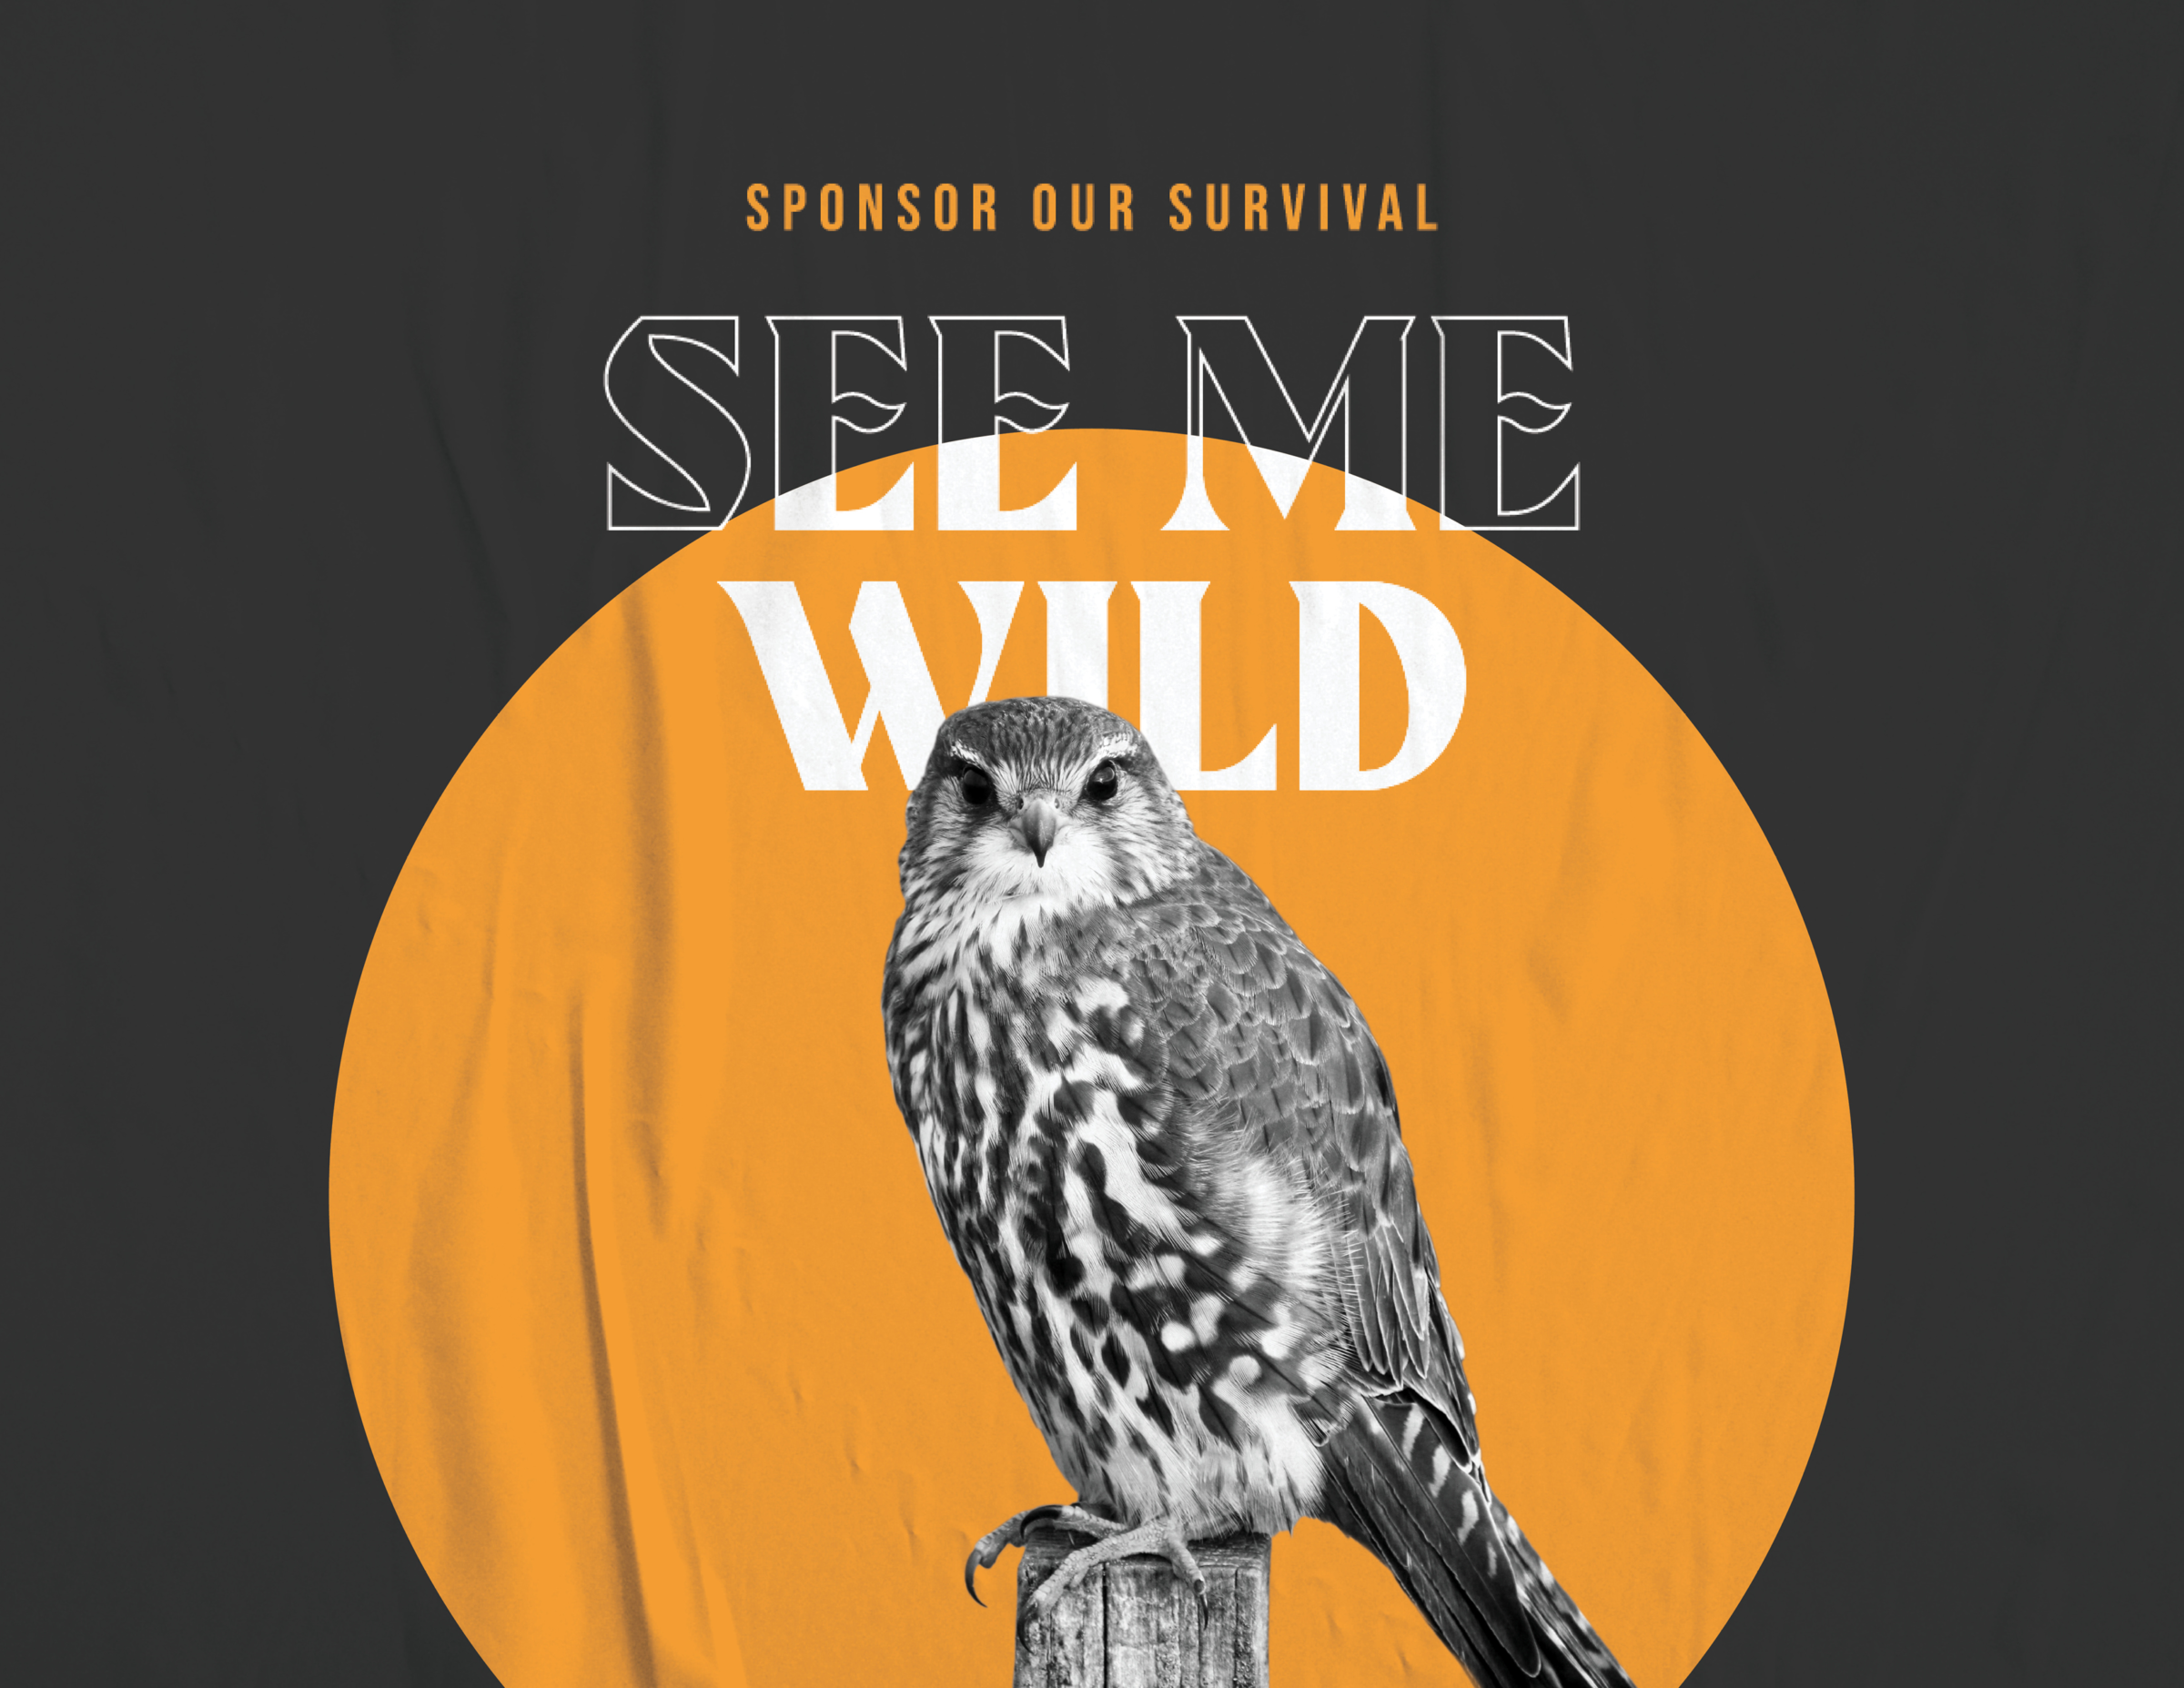 Black and white photo of a hawk on a fence post with "Sponsor our survival" title and "See Me Wild" headline